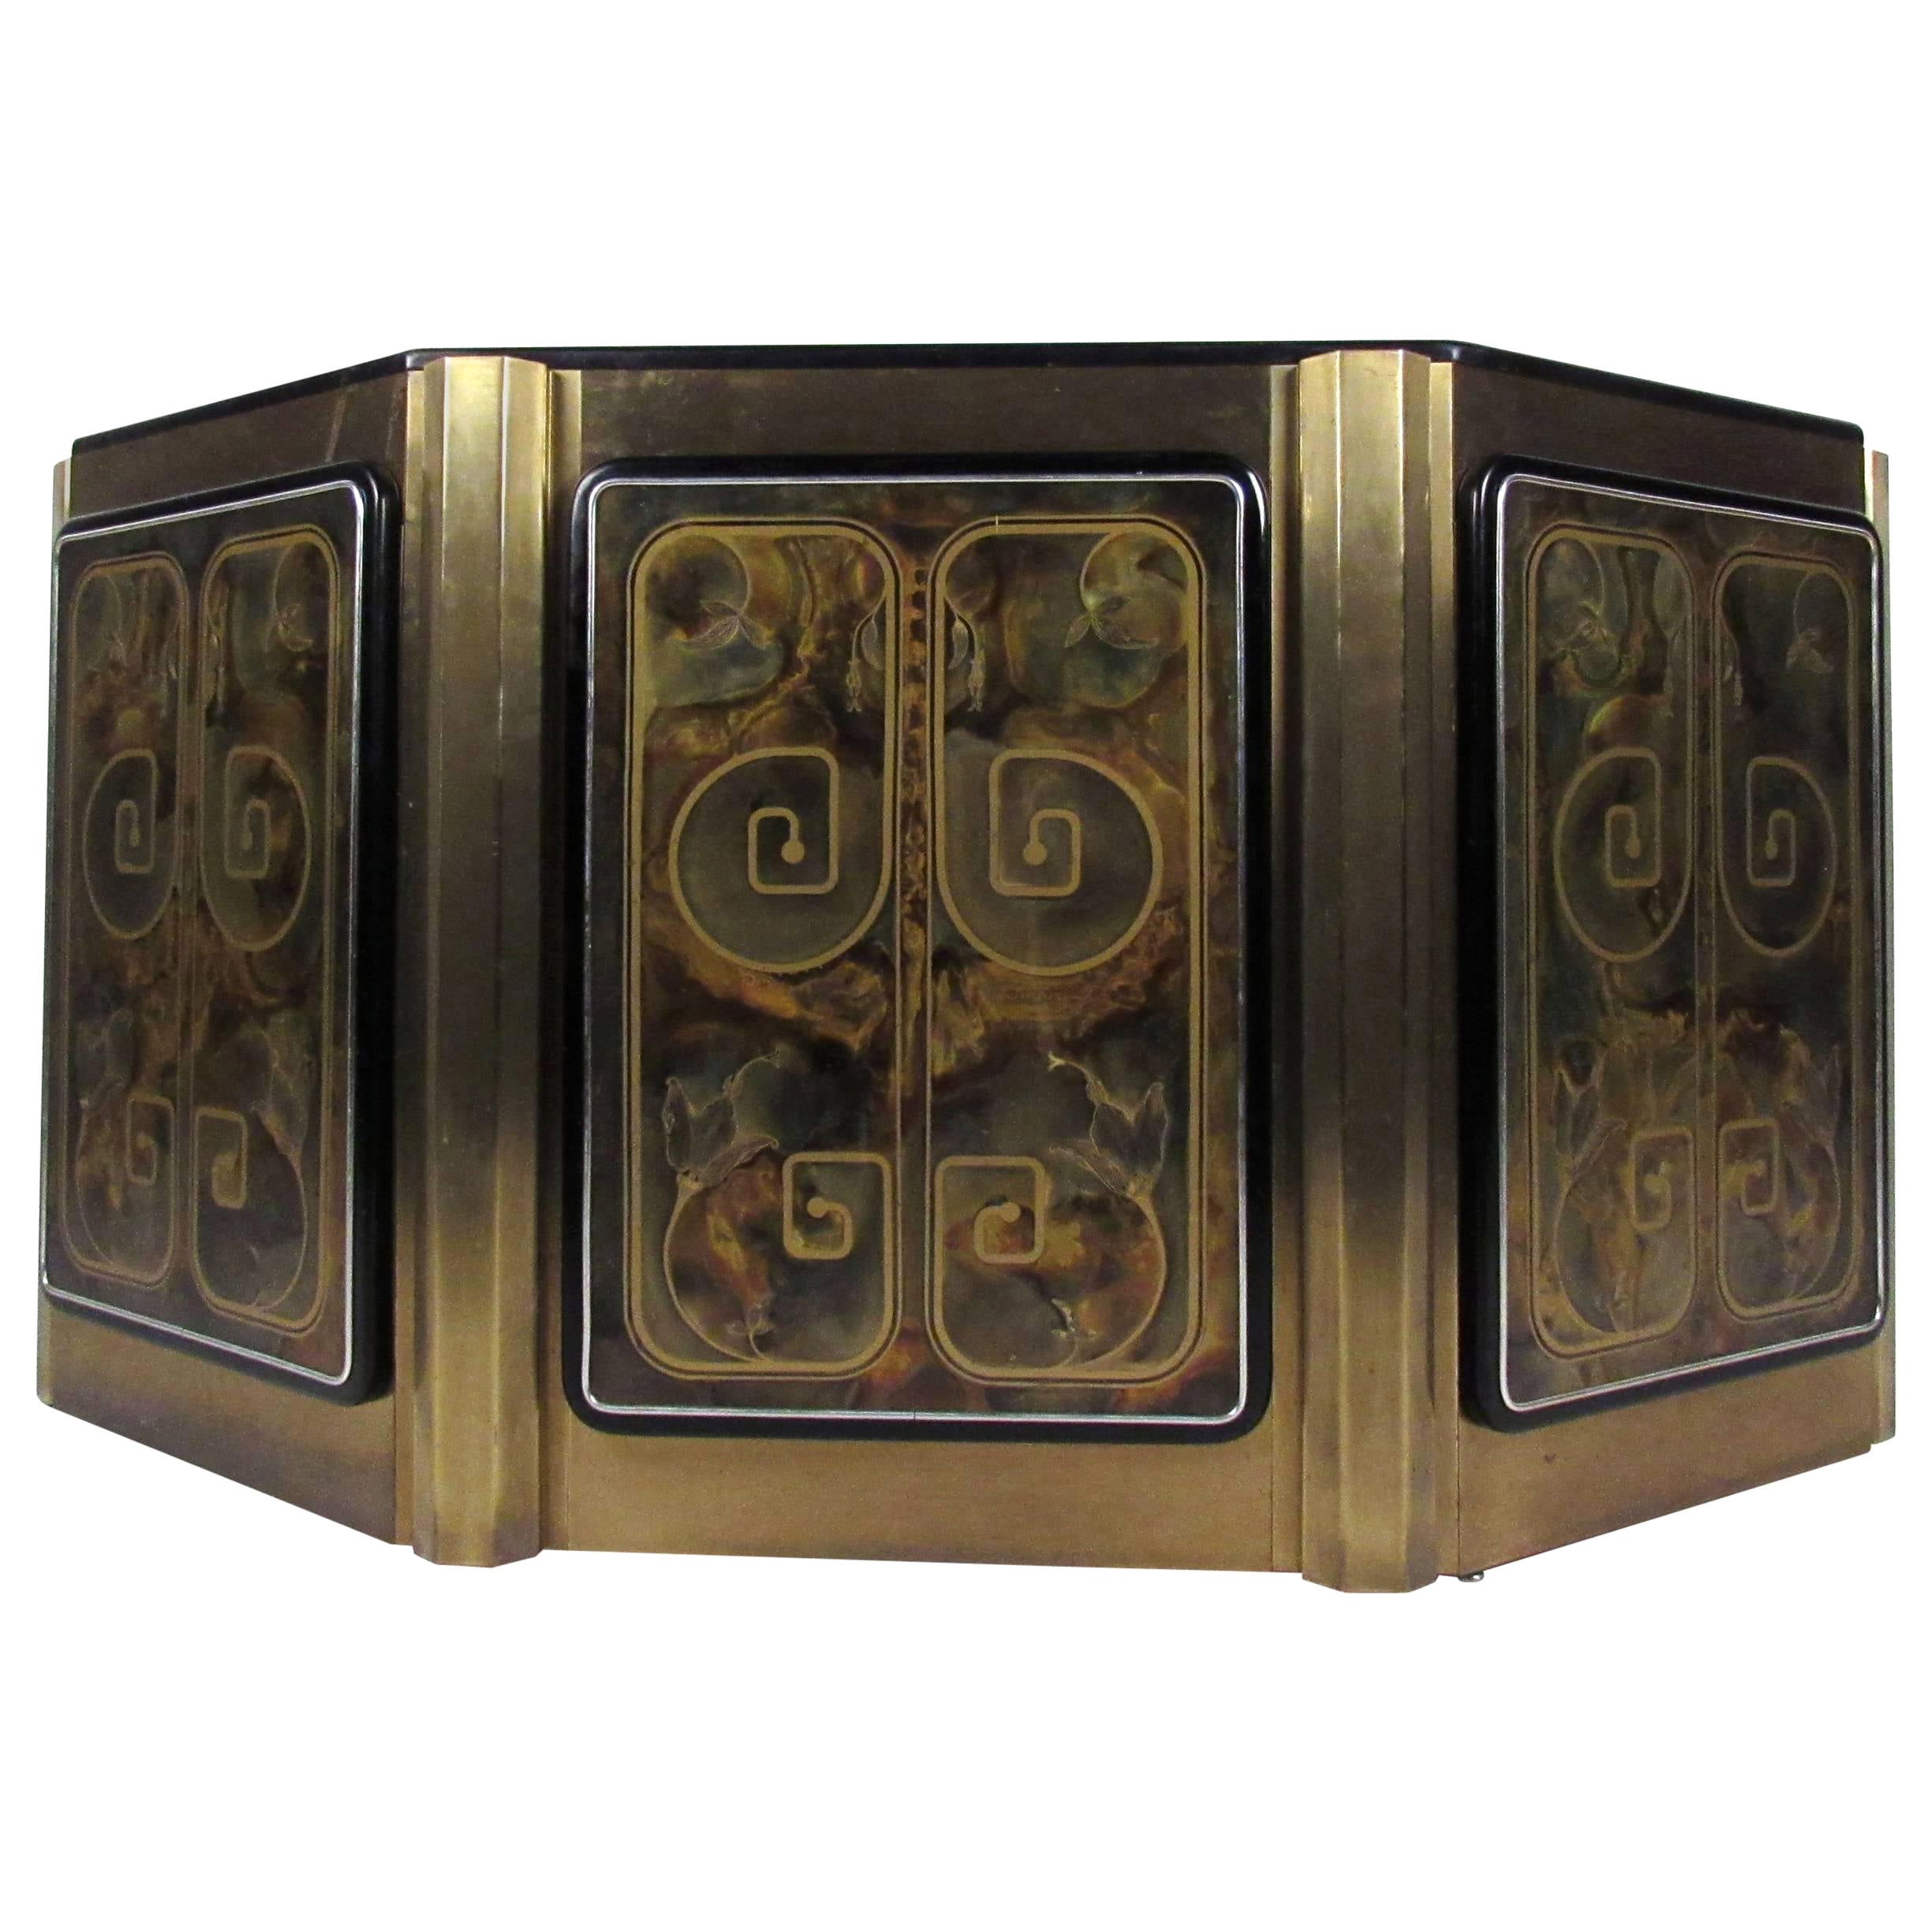 This unique Mid-Century cabinet features an artistic acid-etched floral designs on it's unique brass finish. Center door opens to access fixed shelf cabinet, unique style and shape makes this ideal for hall or entryway. 
Please confirm item location